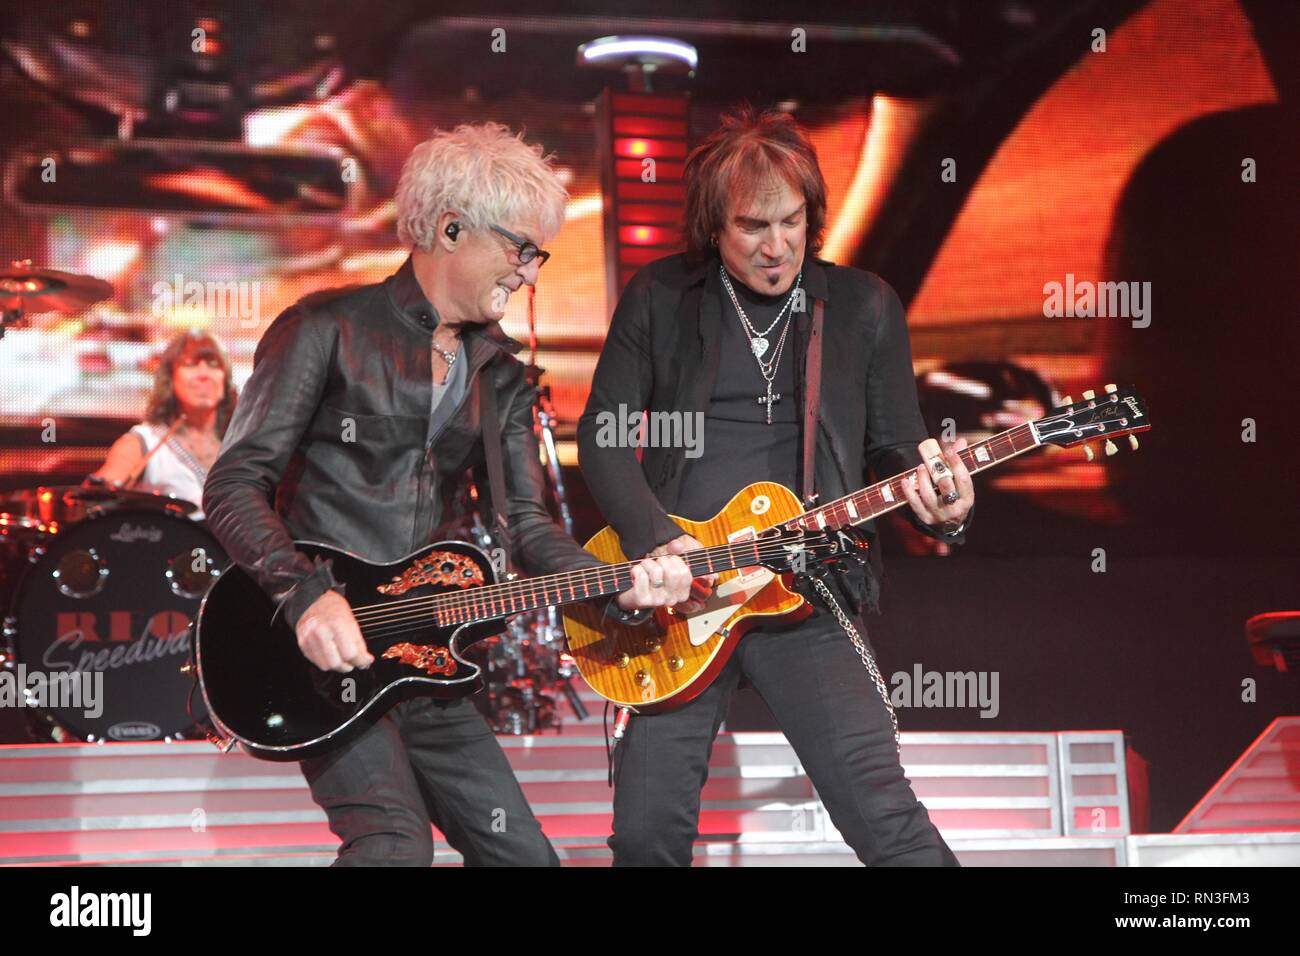 Band members of the rock band REO Speedwagon are shown performing on stage during a 'live' concert appearance. Stock Photo